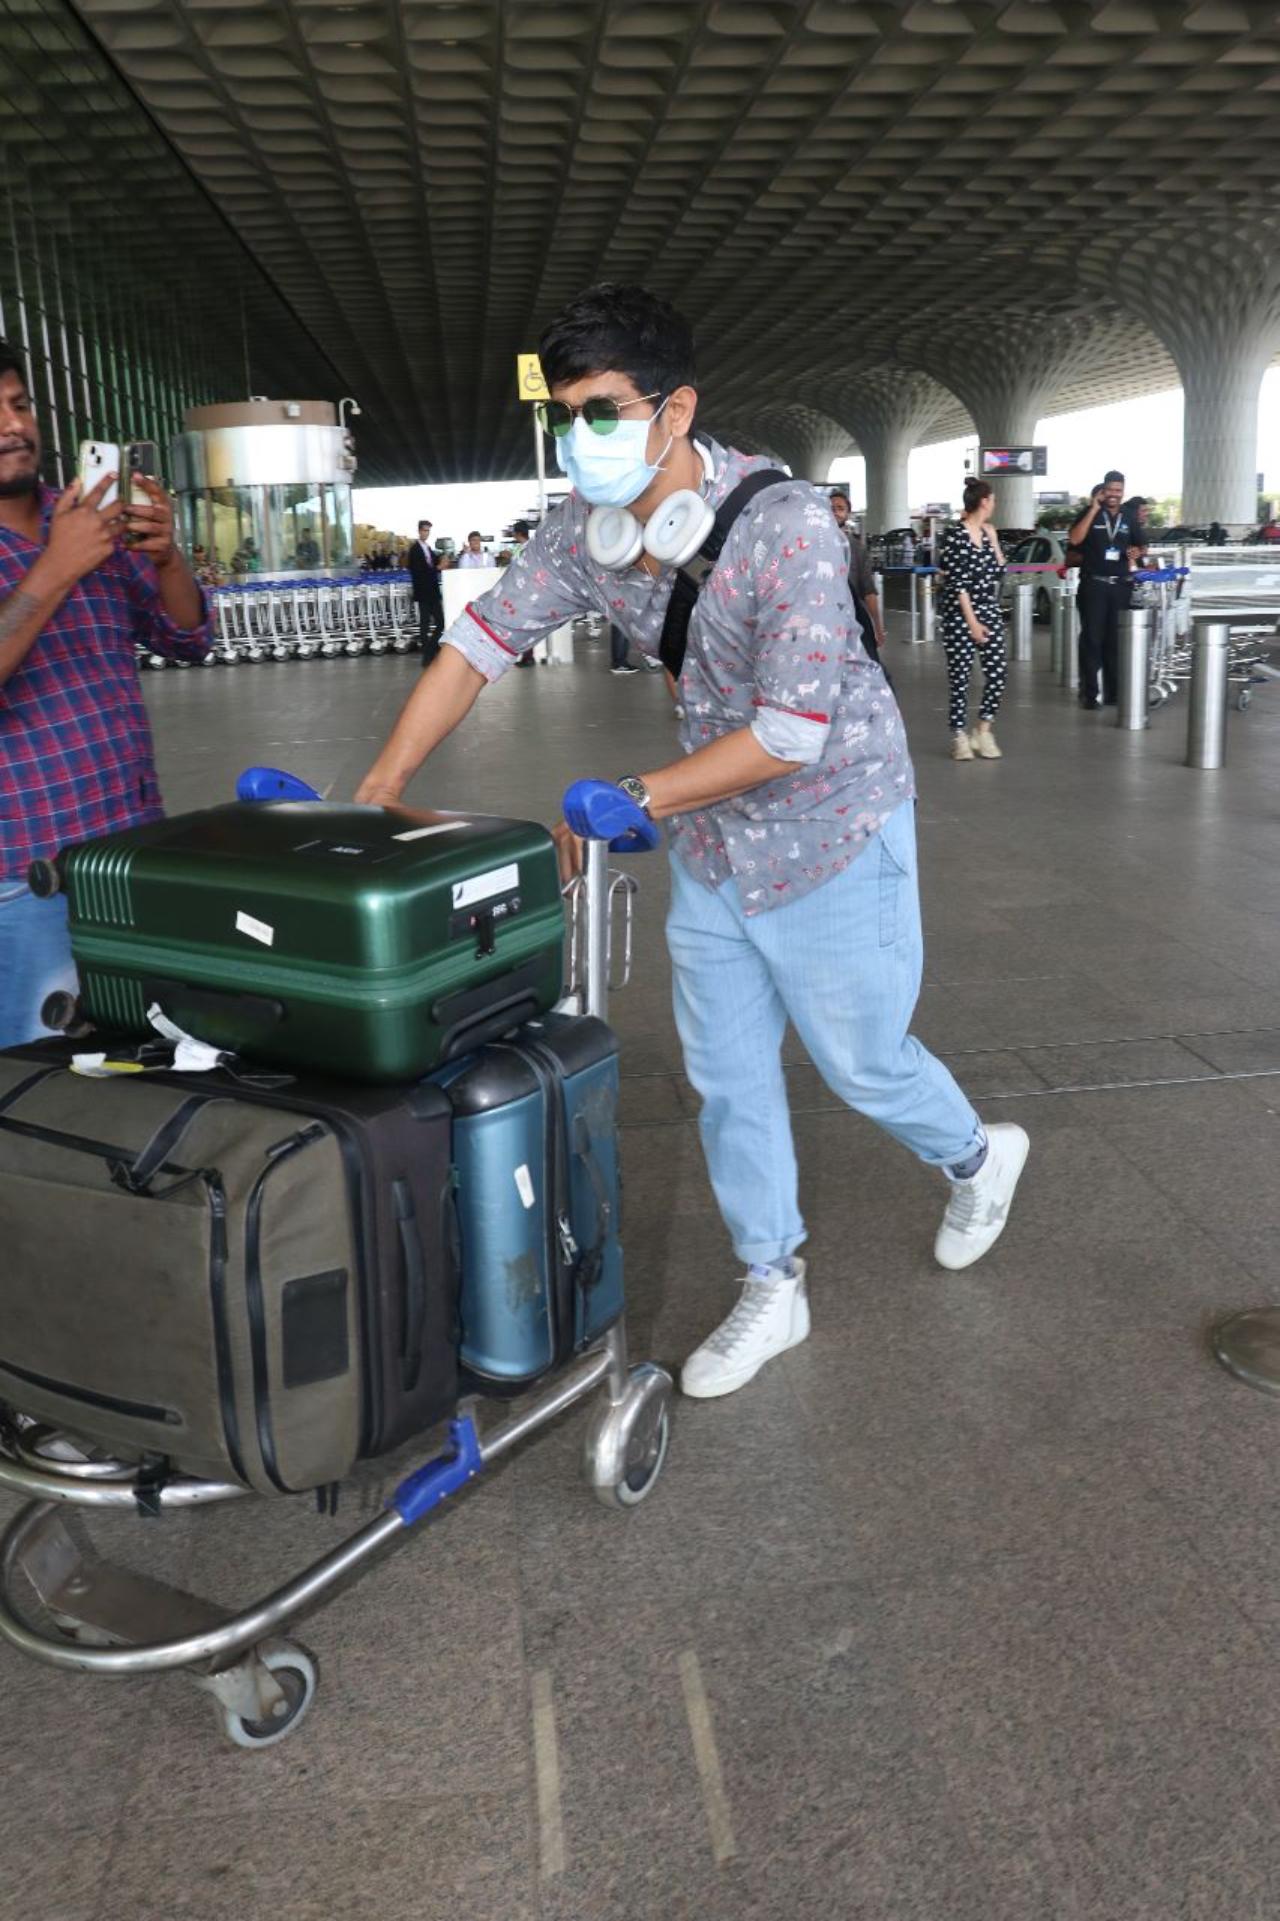 Actor Siddharth, whom Aditi is rumoured to be dating, was also seen at the airport with her. The actor was seen pushing a luggage carrier carrying three suitcases. He was seen wearing a mask and had headphones around his neck. The actor did not wait to pose for the paparazzi